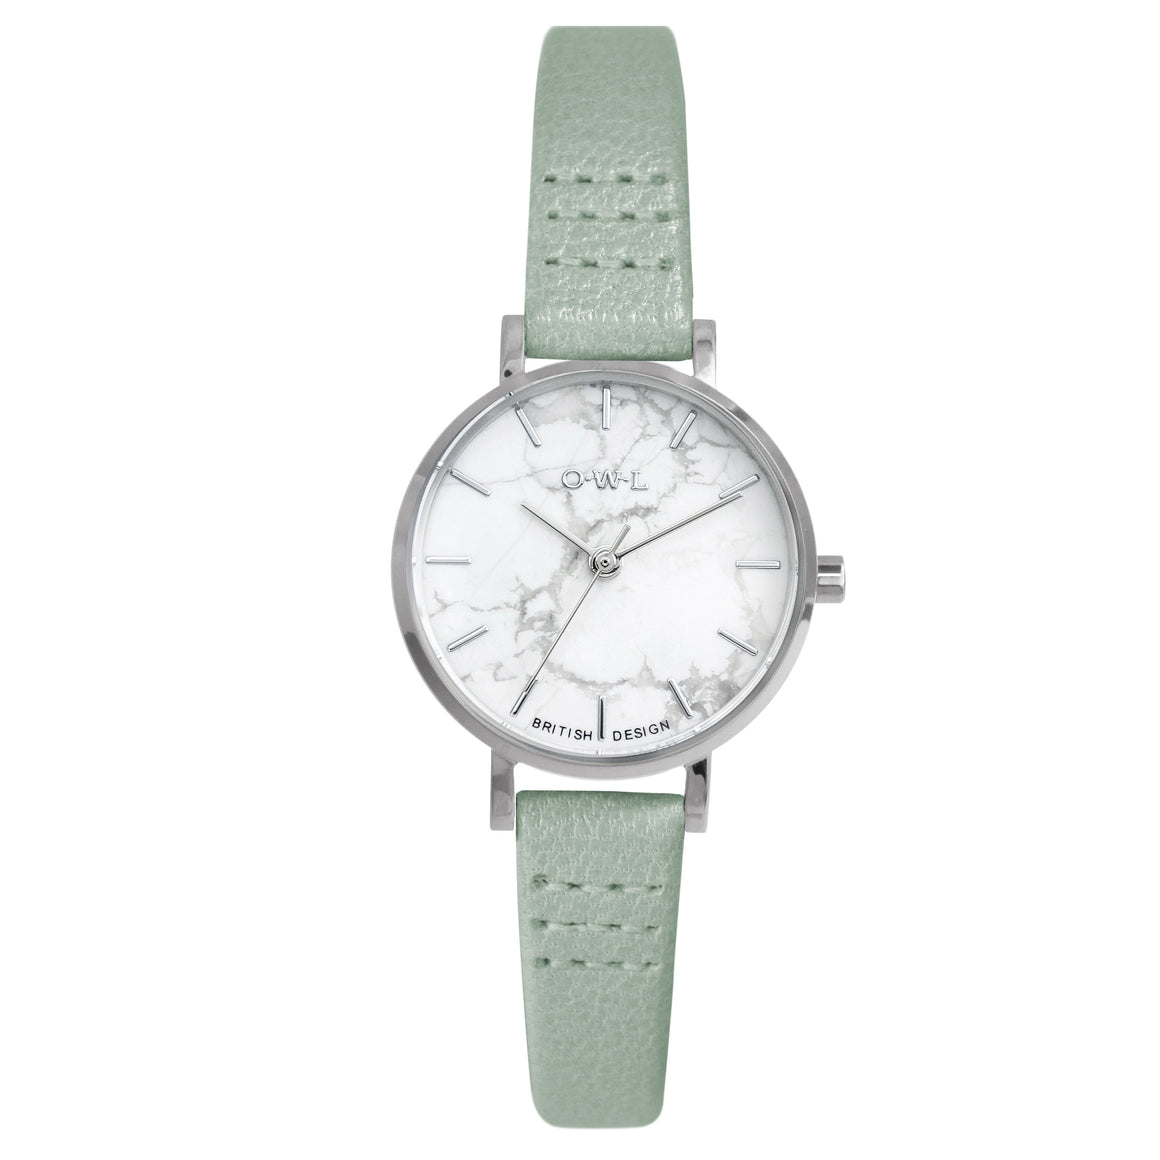 AMESBURY LADIES WATCH WITH HOWLITE NATURAL STONE DIAL & MINT GREEN LEATHER STRAP